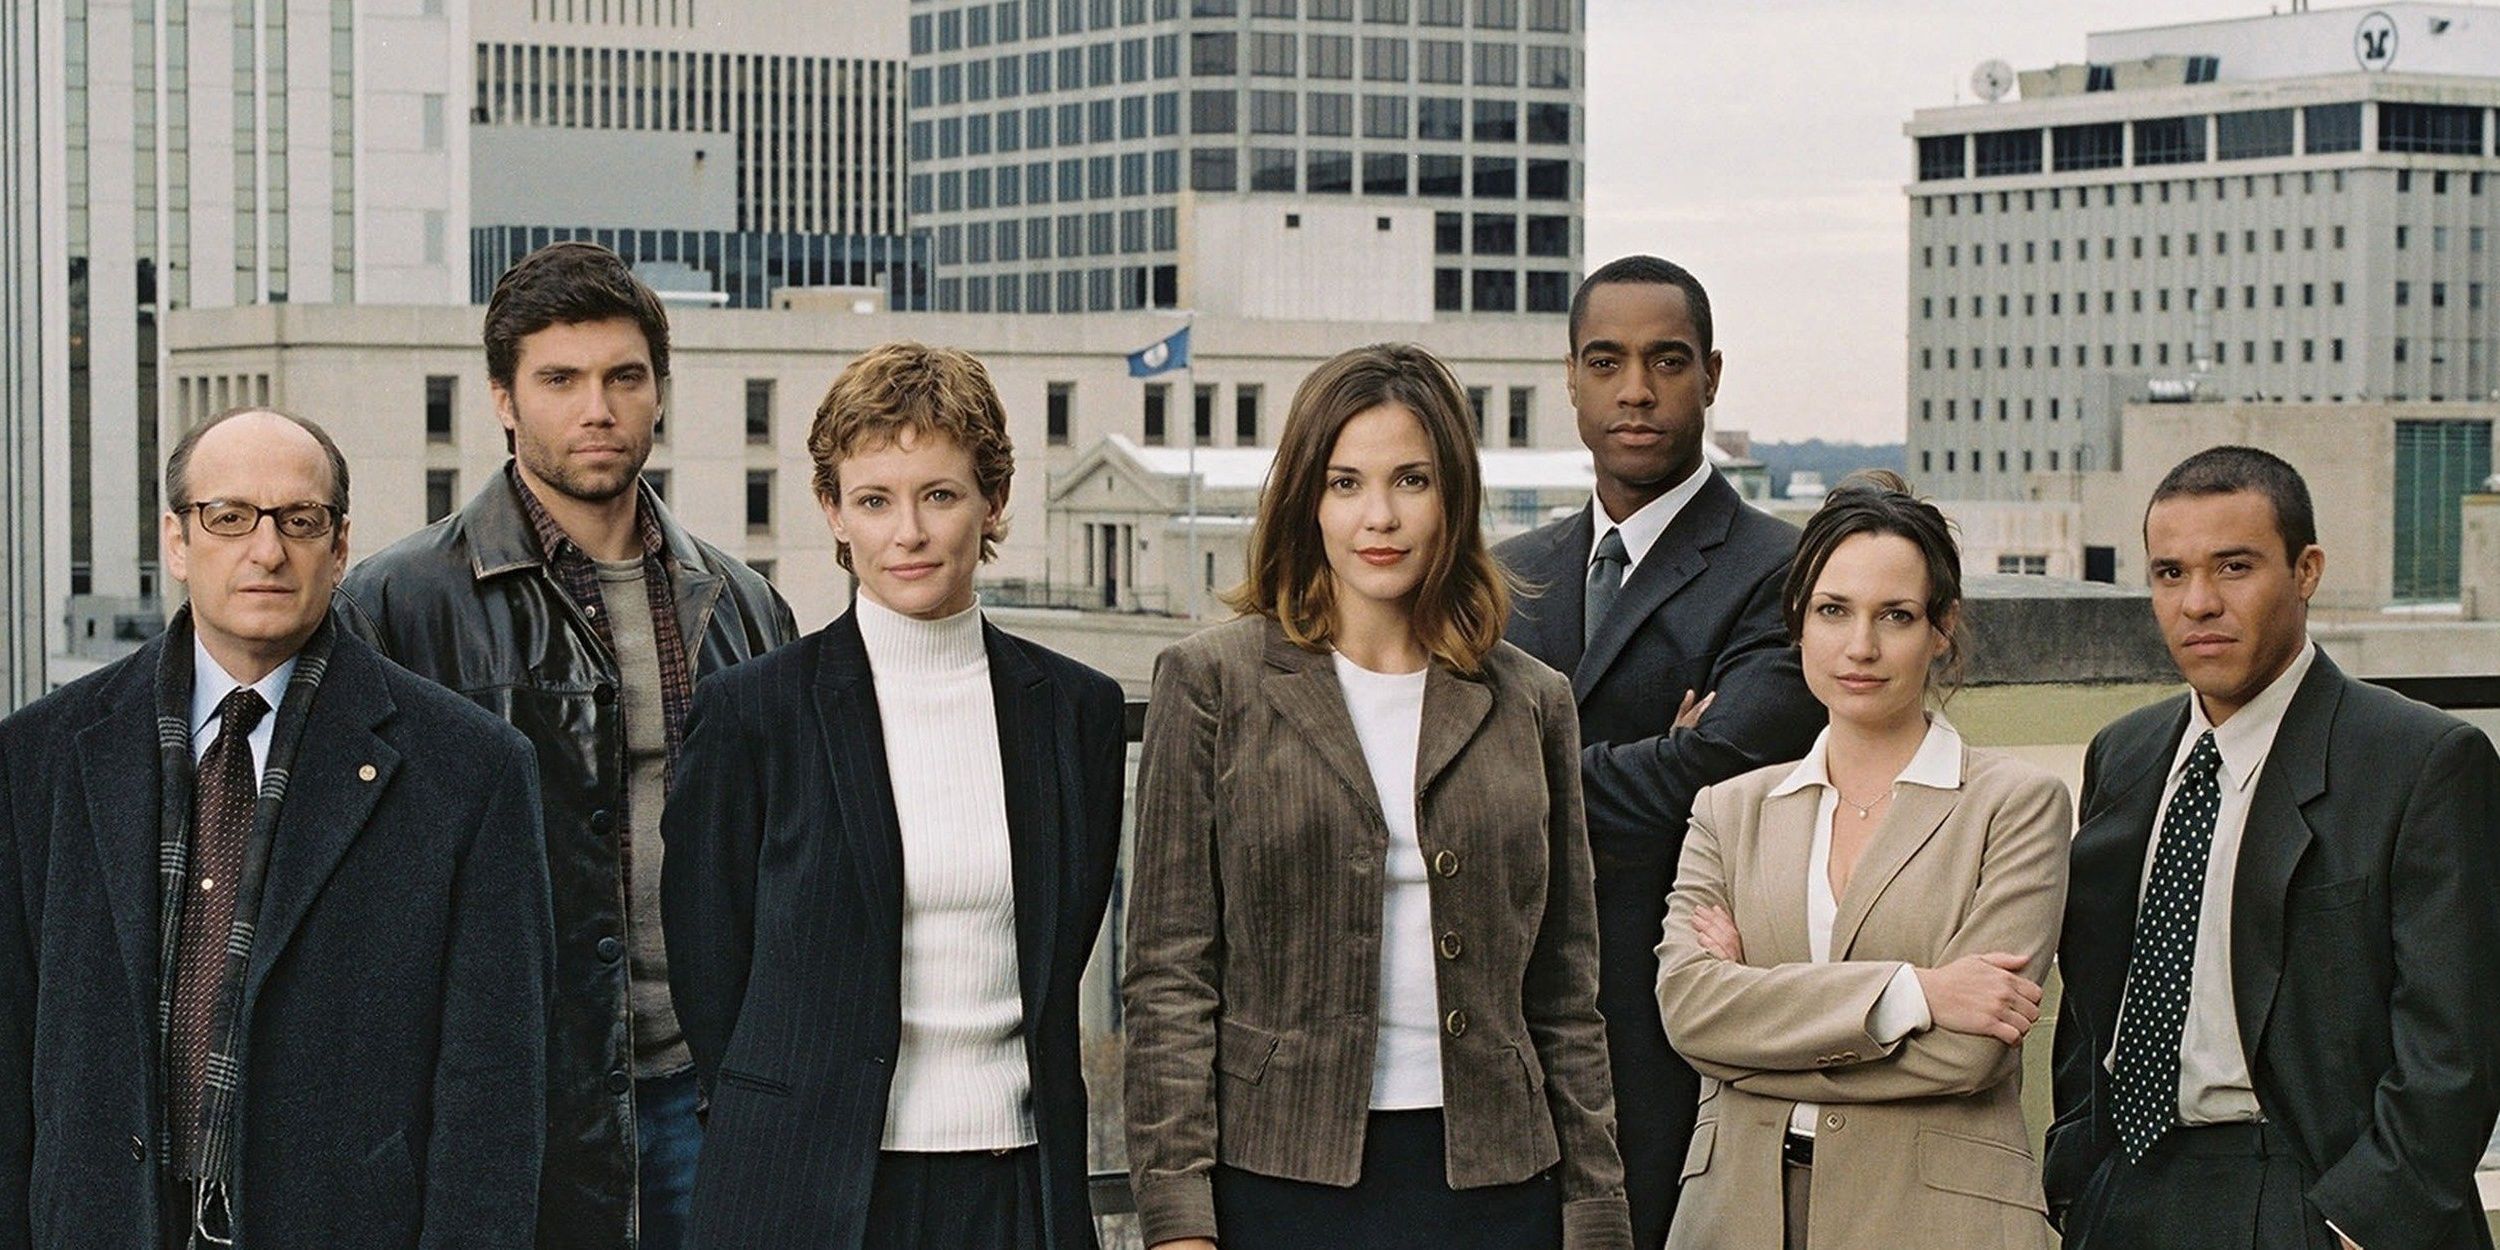 The cast of the television show Line of Fire including a young Anson Mount